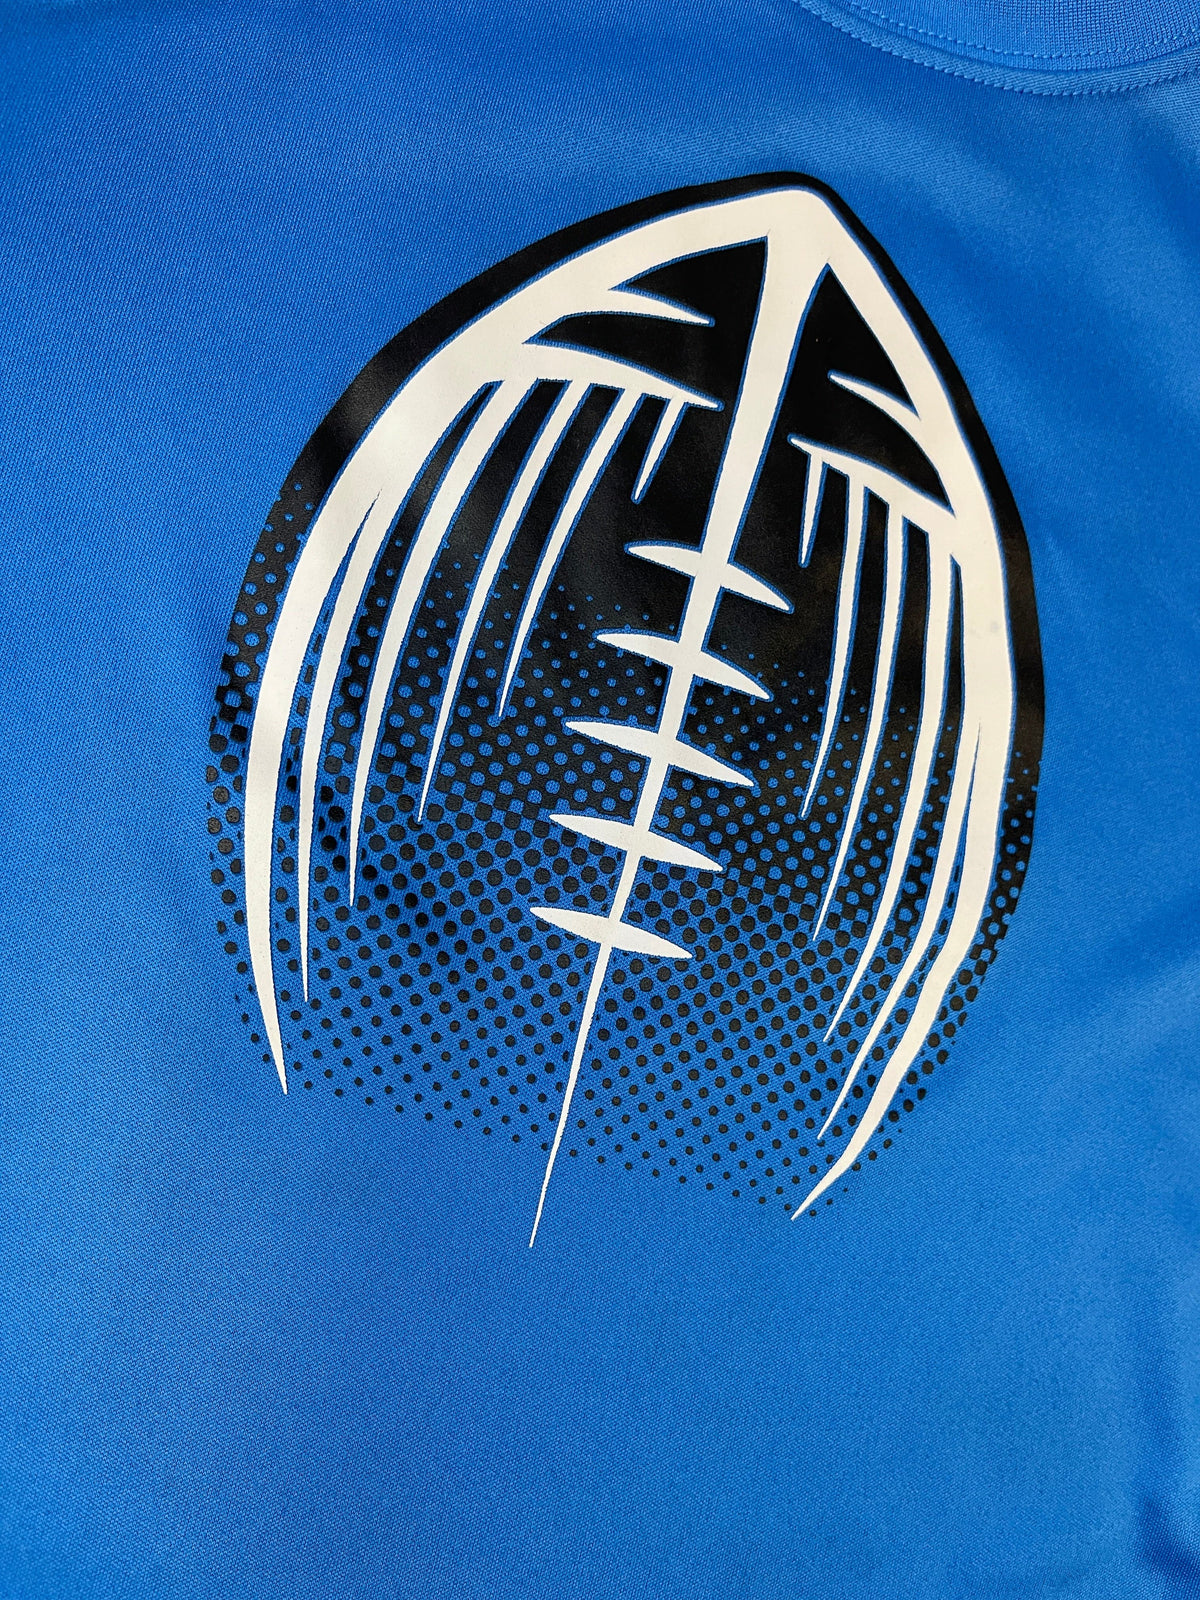 American Football Blue T-Shirt Youth X-Small/Small 5-6